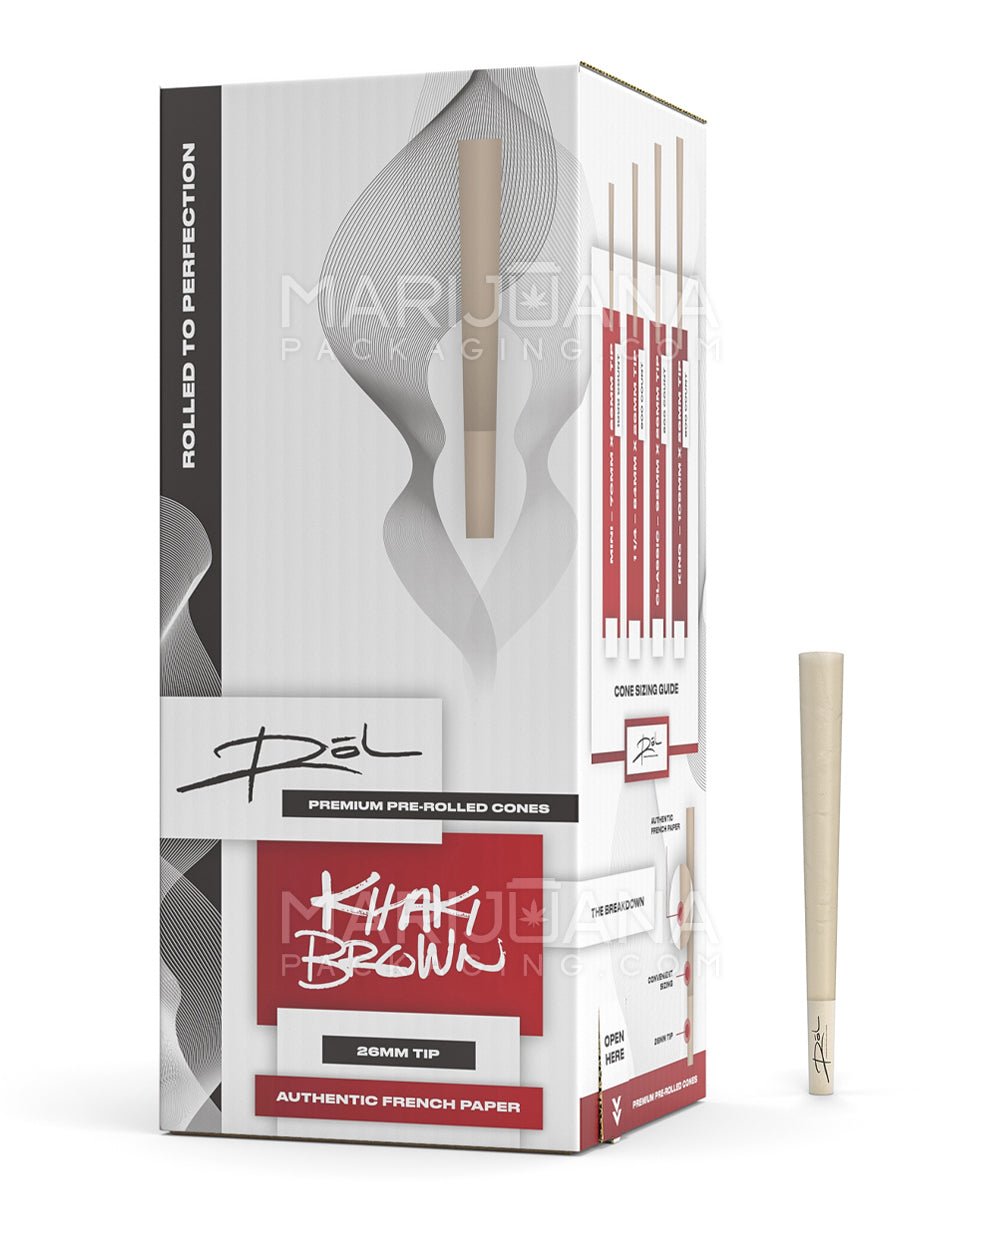 RōL | 98 Special Size Pre-Rolled Cones | 98mm - Khaki Brown Paper - 800 Count - 1